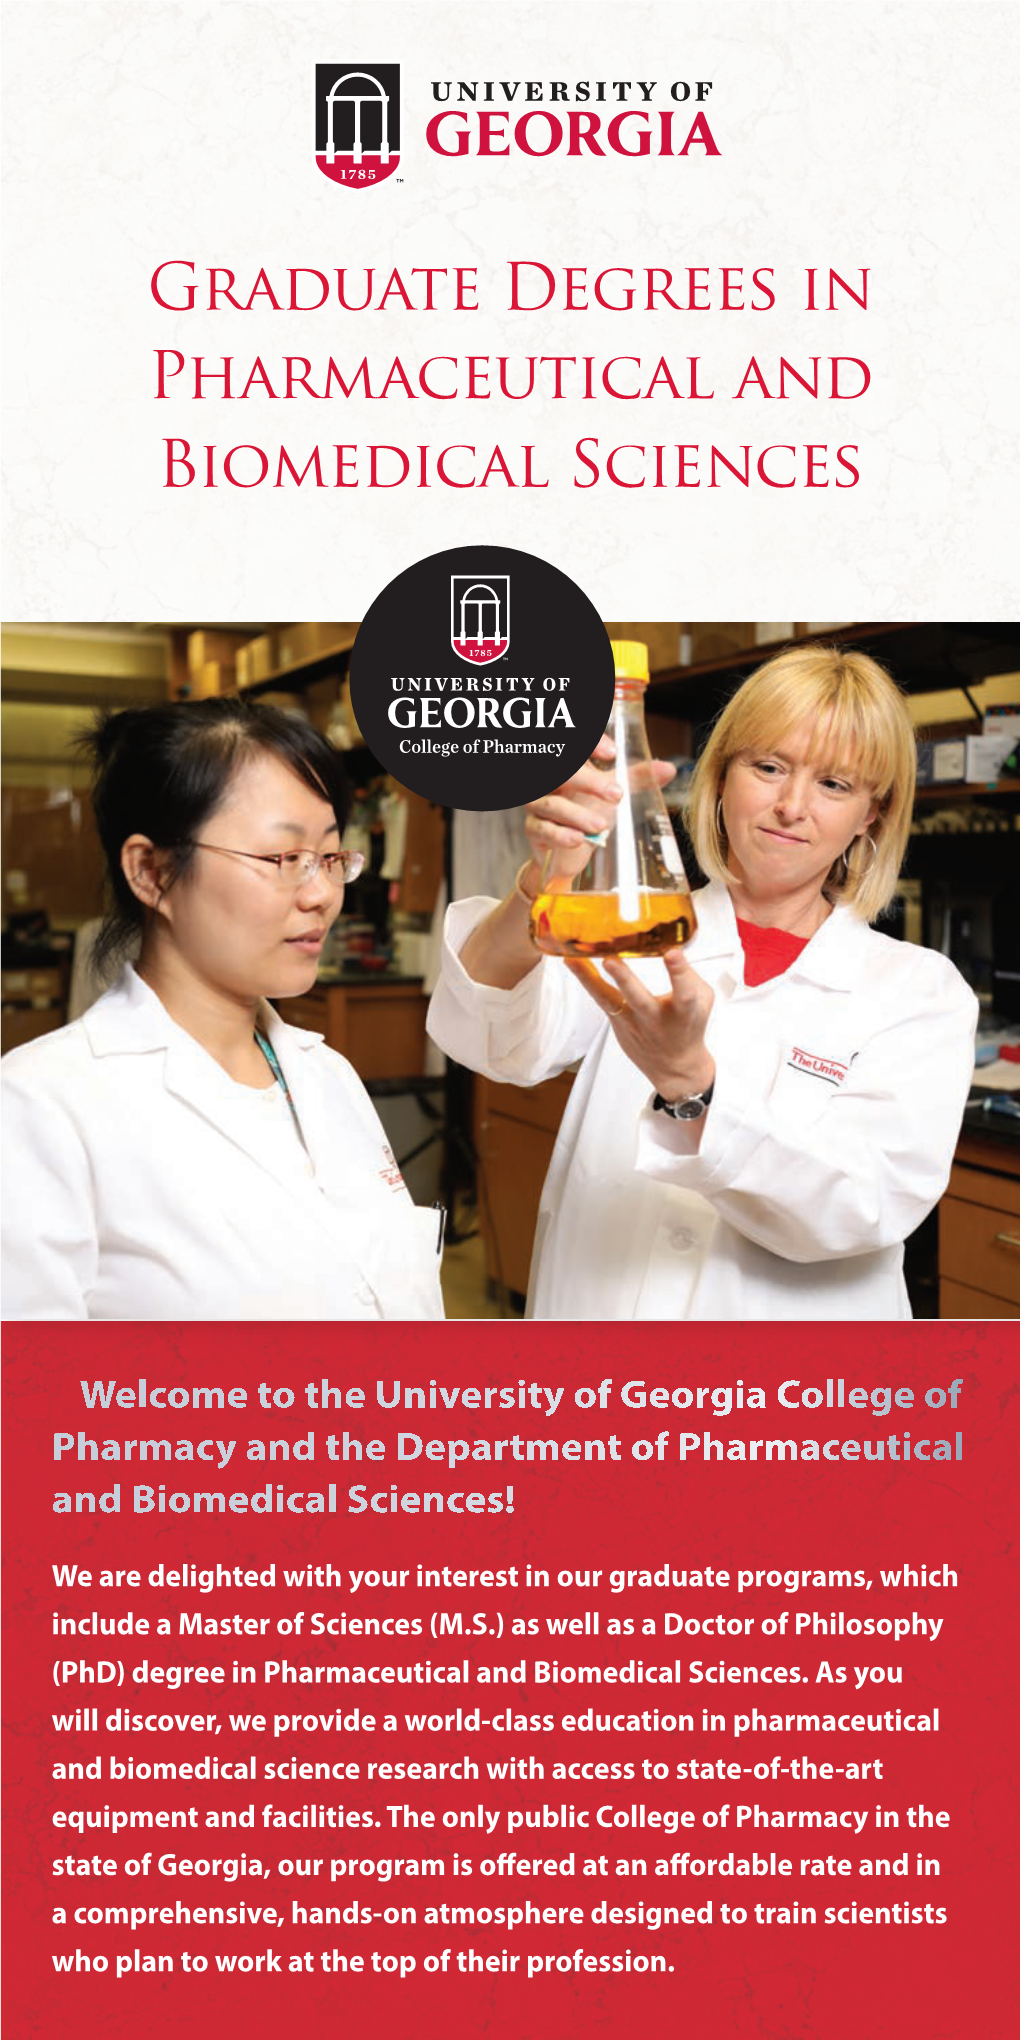 Graduate Degrees in Pharmaceutical and Biomedical Sciences